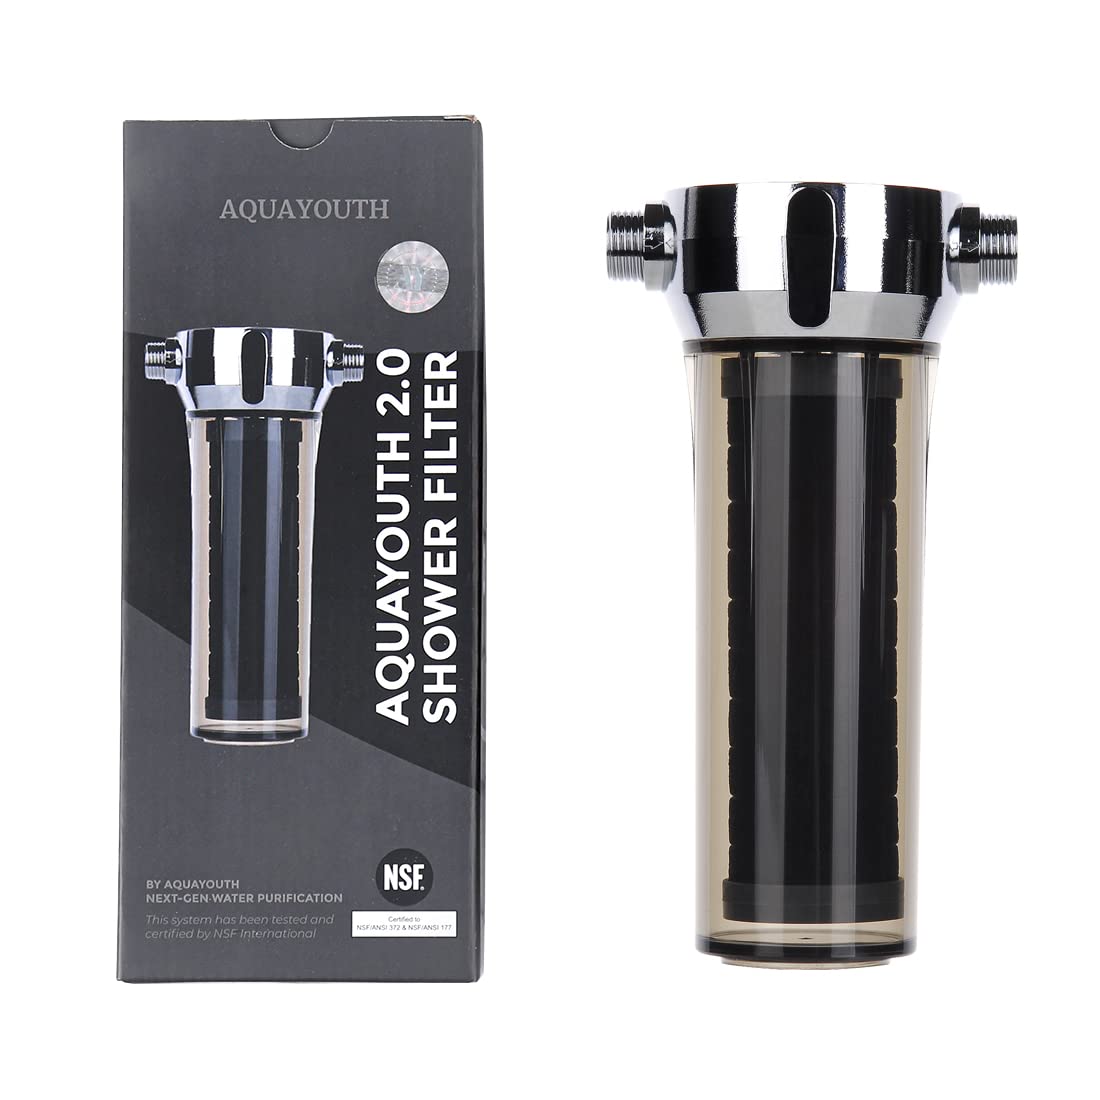 AquaYouth 2.0 Shower Water Filter - Improves Dry Skin, Dry Hair, Asthma, And More | Removes Chlorine, Heavy Metals, And More | Certified to NSF/ANSI 177 & 372